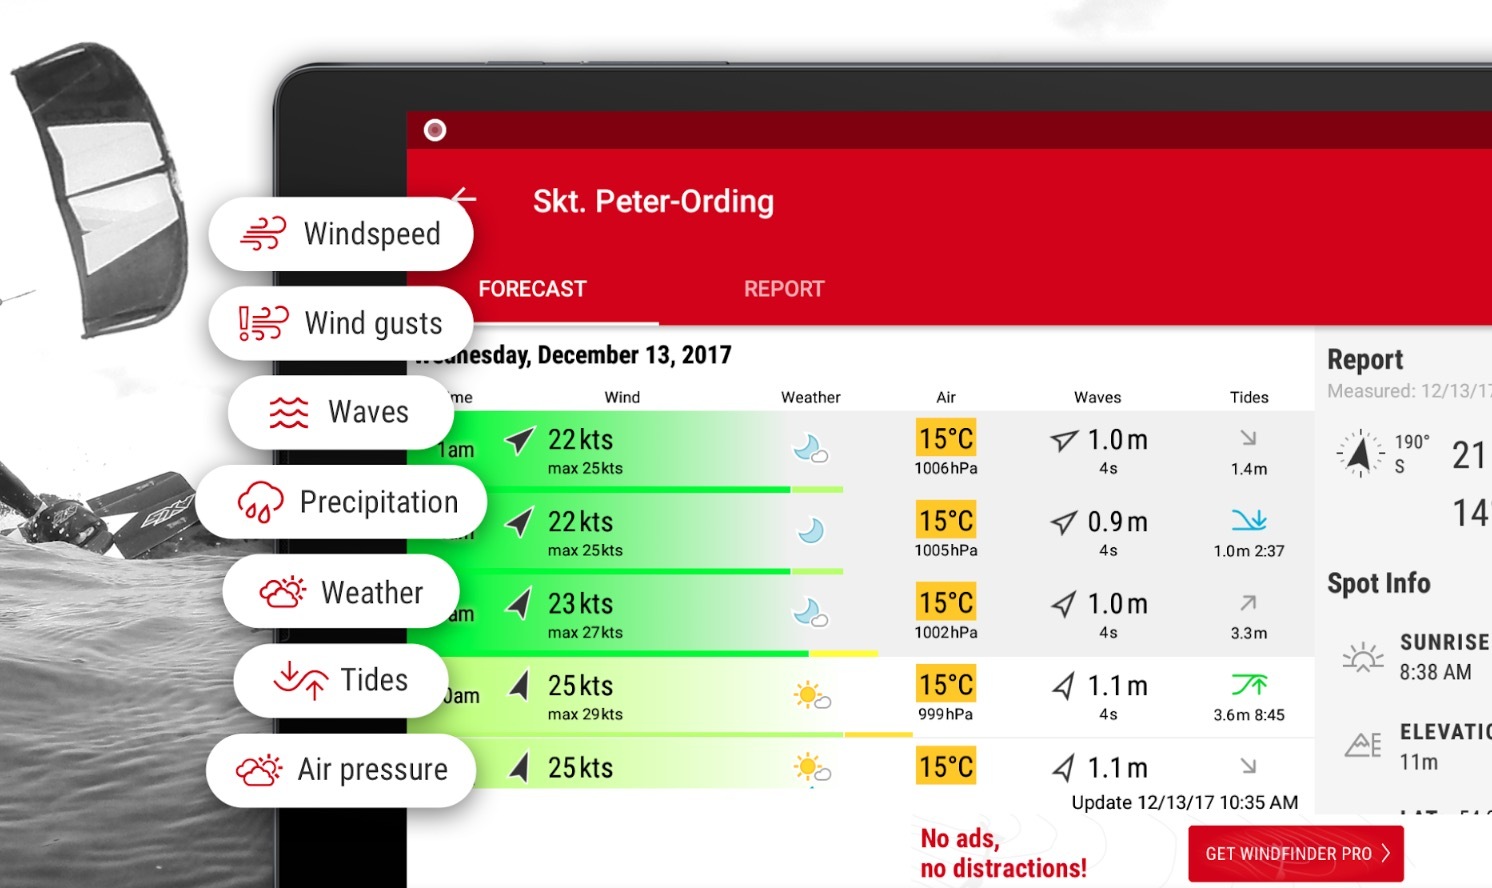 Windfinder-Anwendung "width =" 499 "height =" 297 "srcset =" https://tutomoviles.com/wp-content/uploads/2020/01/1580241631_376_7-application-Android-best-to-check-speed-angin- im Moment.jpg 1492w, https://androidappsforme.com/wp -content / uploads / 2019/11 / Windfinder-app-300x179.jpg 300w, https://androidappsforme.com/wp-content/uploads/2019/ 11 / Windfinder-app-1024x609.jpg 1024w, https: // androidappsforme.com / wp-content / uploads / 2019/11 / Windfinder-app-150x89.jpg 150w, https://androidappsforme.com/wp-content/ Uploads / 2019/11 / Windfinder-App-768x457.jpg 768w, https://androidappsforme.com/wp-content/uploads/2019/11/Windfinder-app-80x48.jpg 80w, https://androidappsforme.com/ wp-content / uploads / 2019/11 / Windfinder-app-220x131. jpg 220w, https://androidappsforme.com/wp-content/uploads/2019/11/Windfinder-app-168x100.jpg 168w, https://androidappsforme.com/wp-content/uploads/2019/11/ Windfinder- app-252x150.jpg 252w, https://androidappsforme.com/wp-content/uploads/2019/11/Windfinder-app-400x238.jpg 400w, https://androidappsforme.com/wp-content/uploads/2019/ 11 / Windfinder-Anwendung -697x415.jpg 697w, https://androidappsforme.com/wp-content/uploads/2019/11/Windfinder-app-818x487.jpg 818w, https://androidappsforme.com/wp-content/uploads / 2019/11 /Windfinder-app-1000x595.jpg 1000w "size =" (maximale Breite: 499px) 100vw, 499px